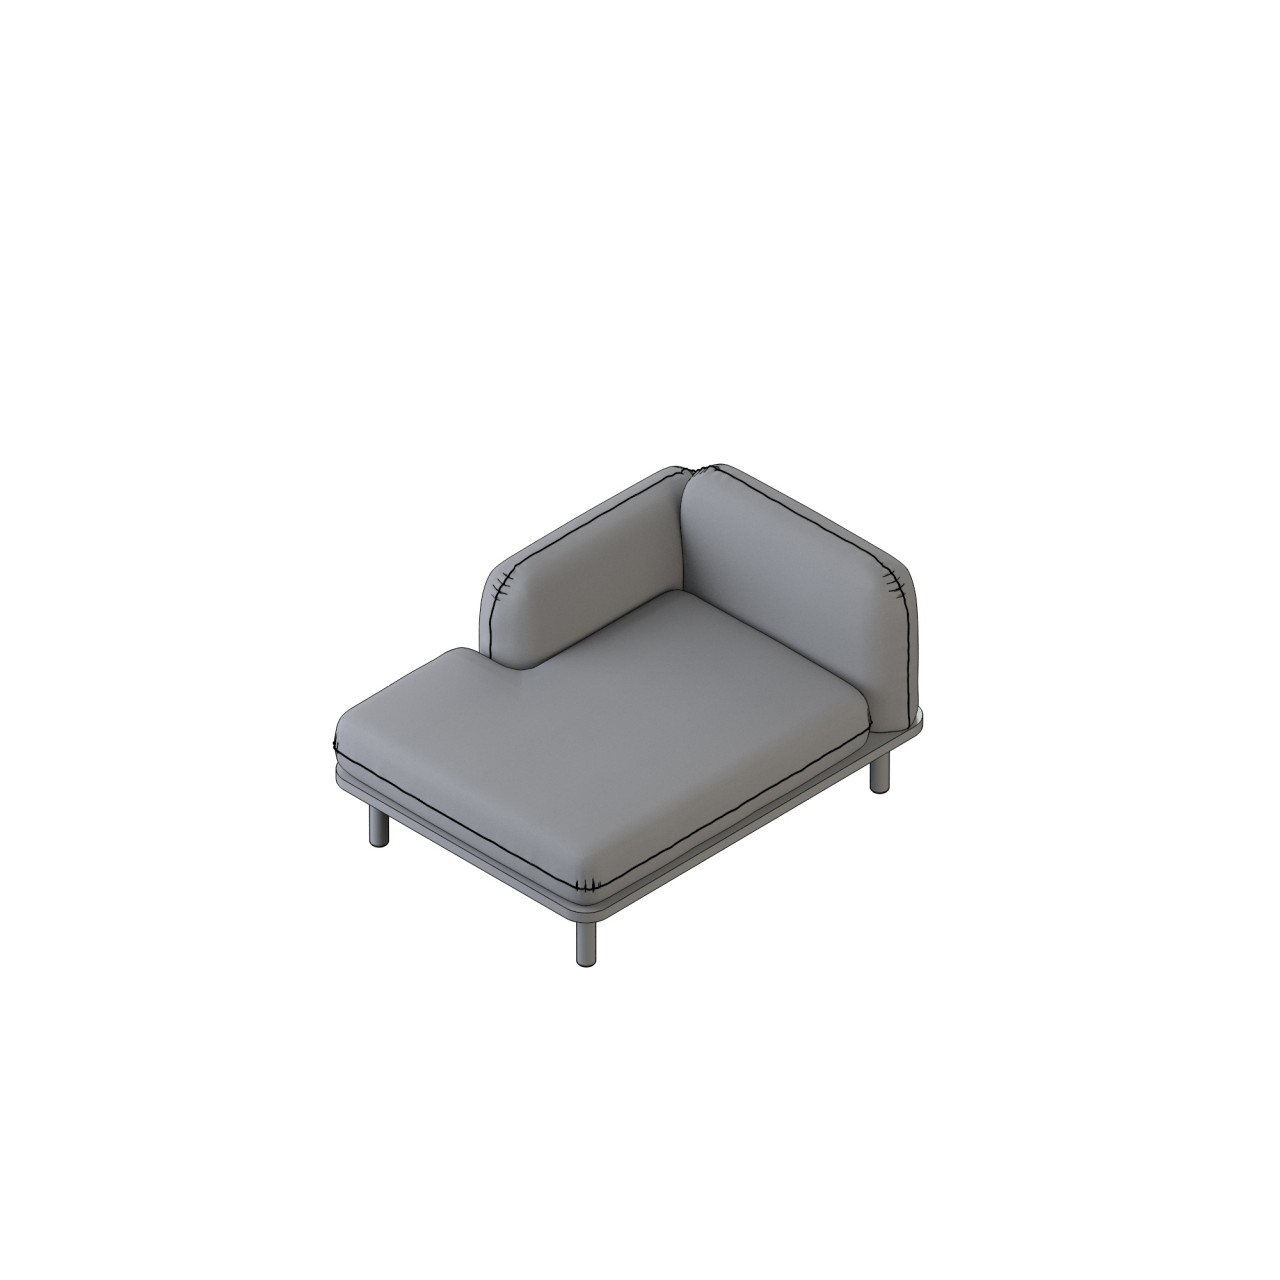 Soft - 24010R
right arm chaise
COM 6.75
arms 1.25, back 1.5,
base 2, seat 2.75
 